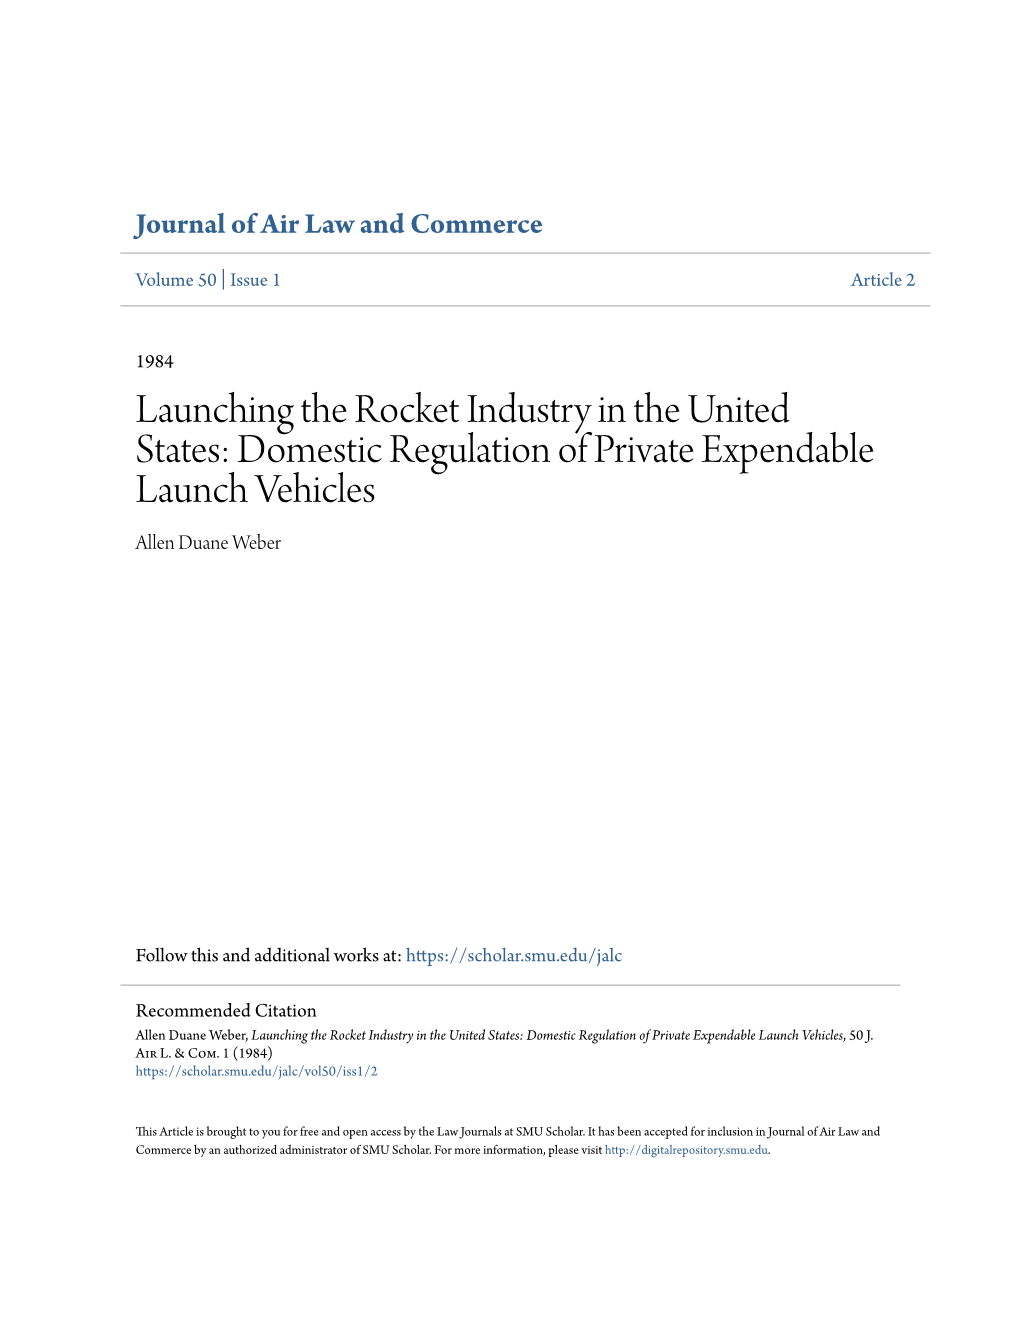 Launching the Rocket Industry in the United States: Domestic Regulation of Private Expendable Launch Vehicles Allen Duane Weber